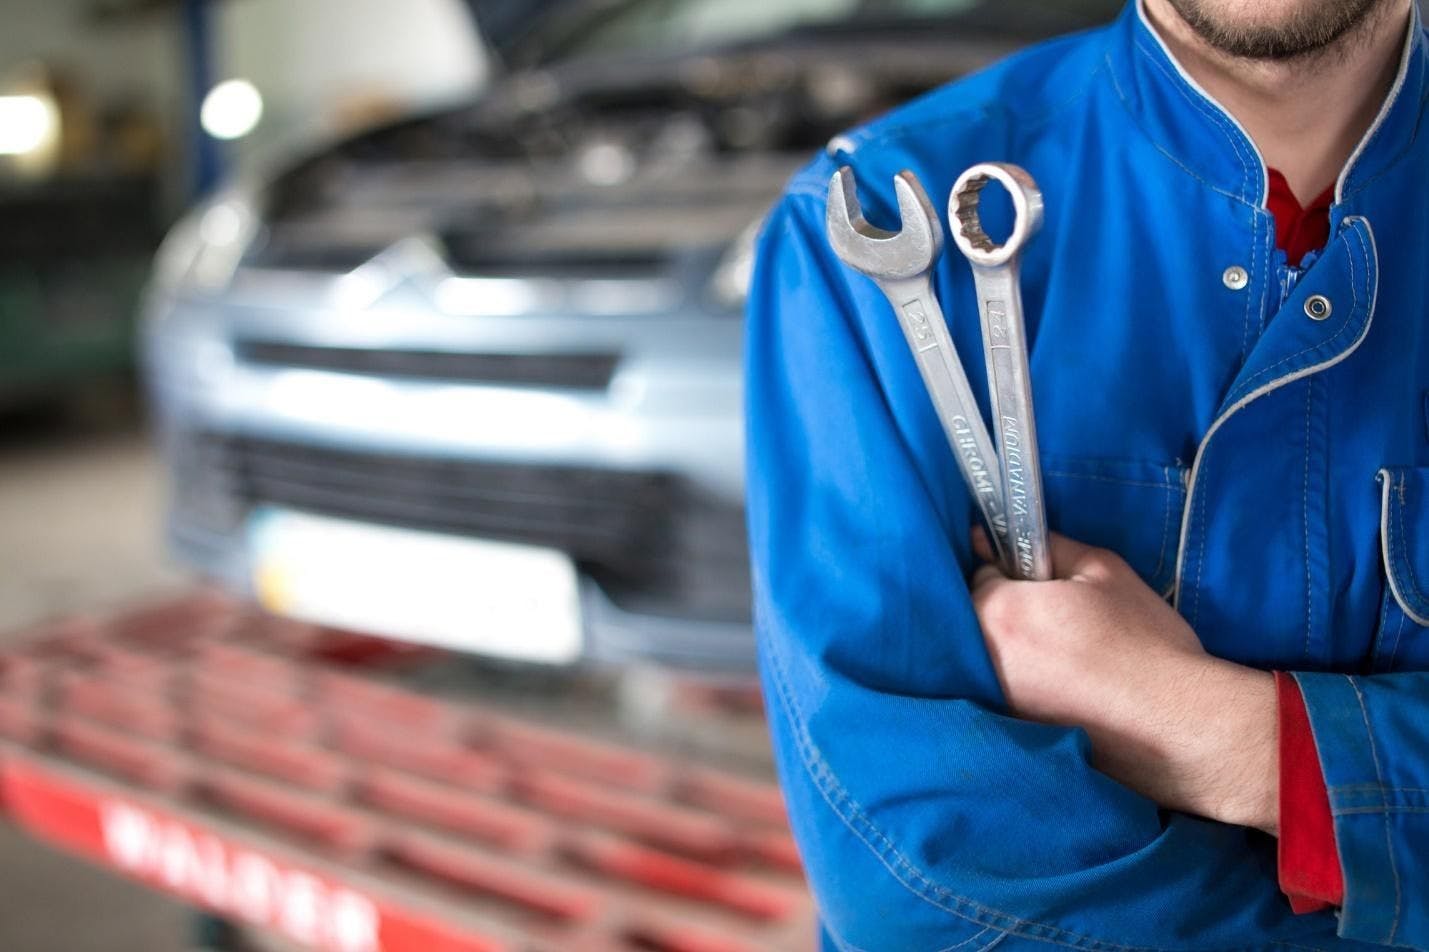 How to Find a Good Honda Accord Mechanic